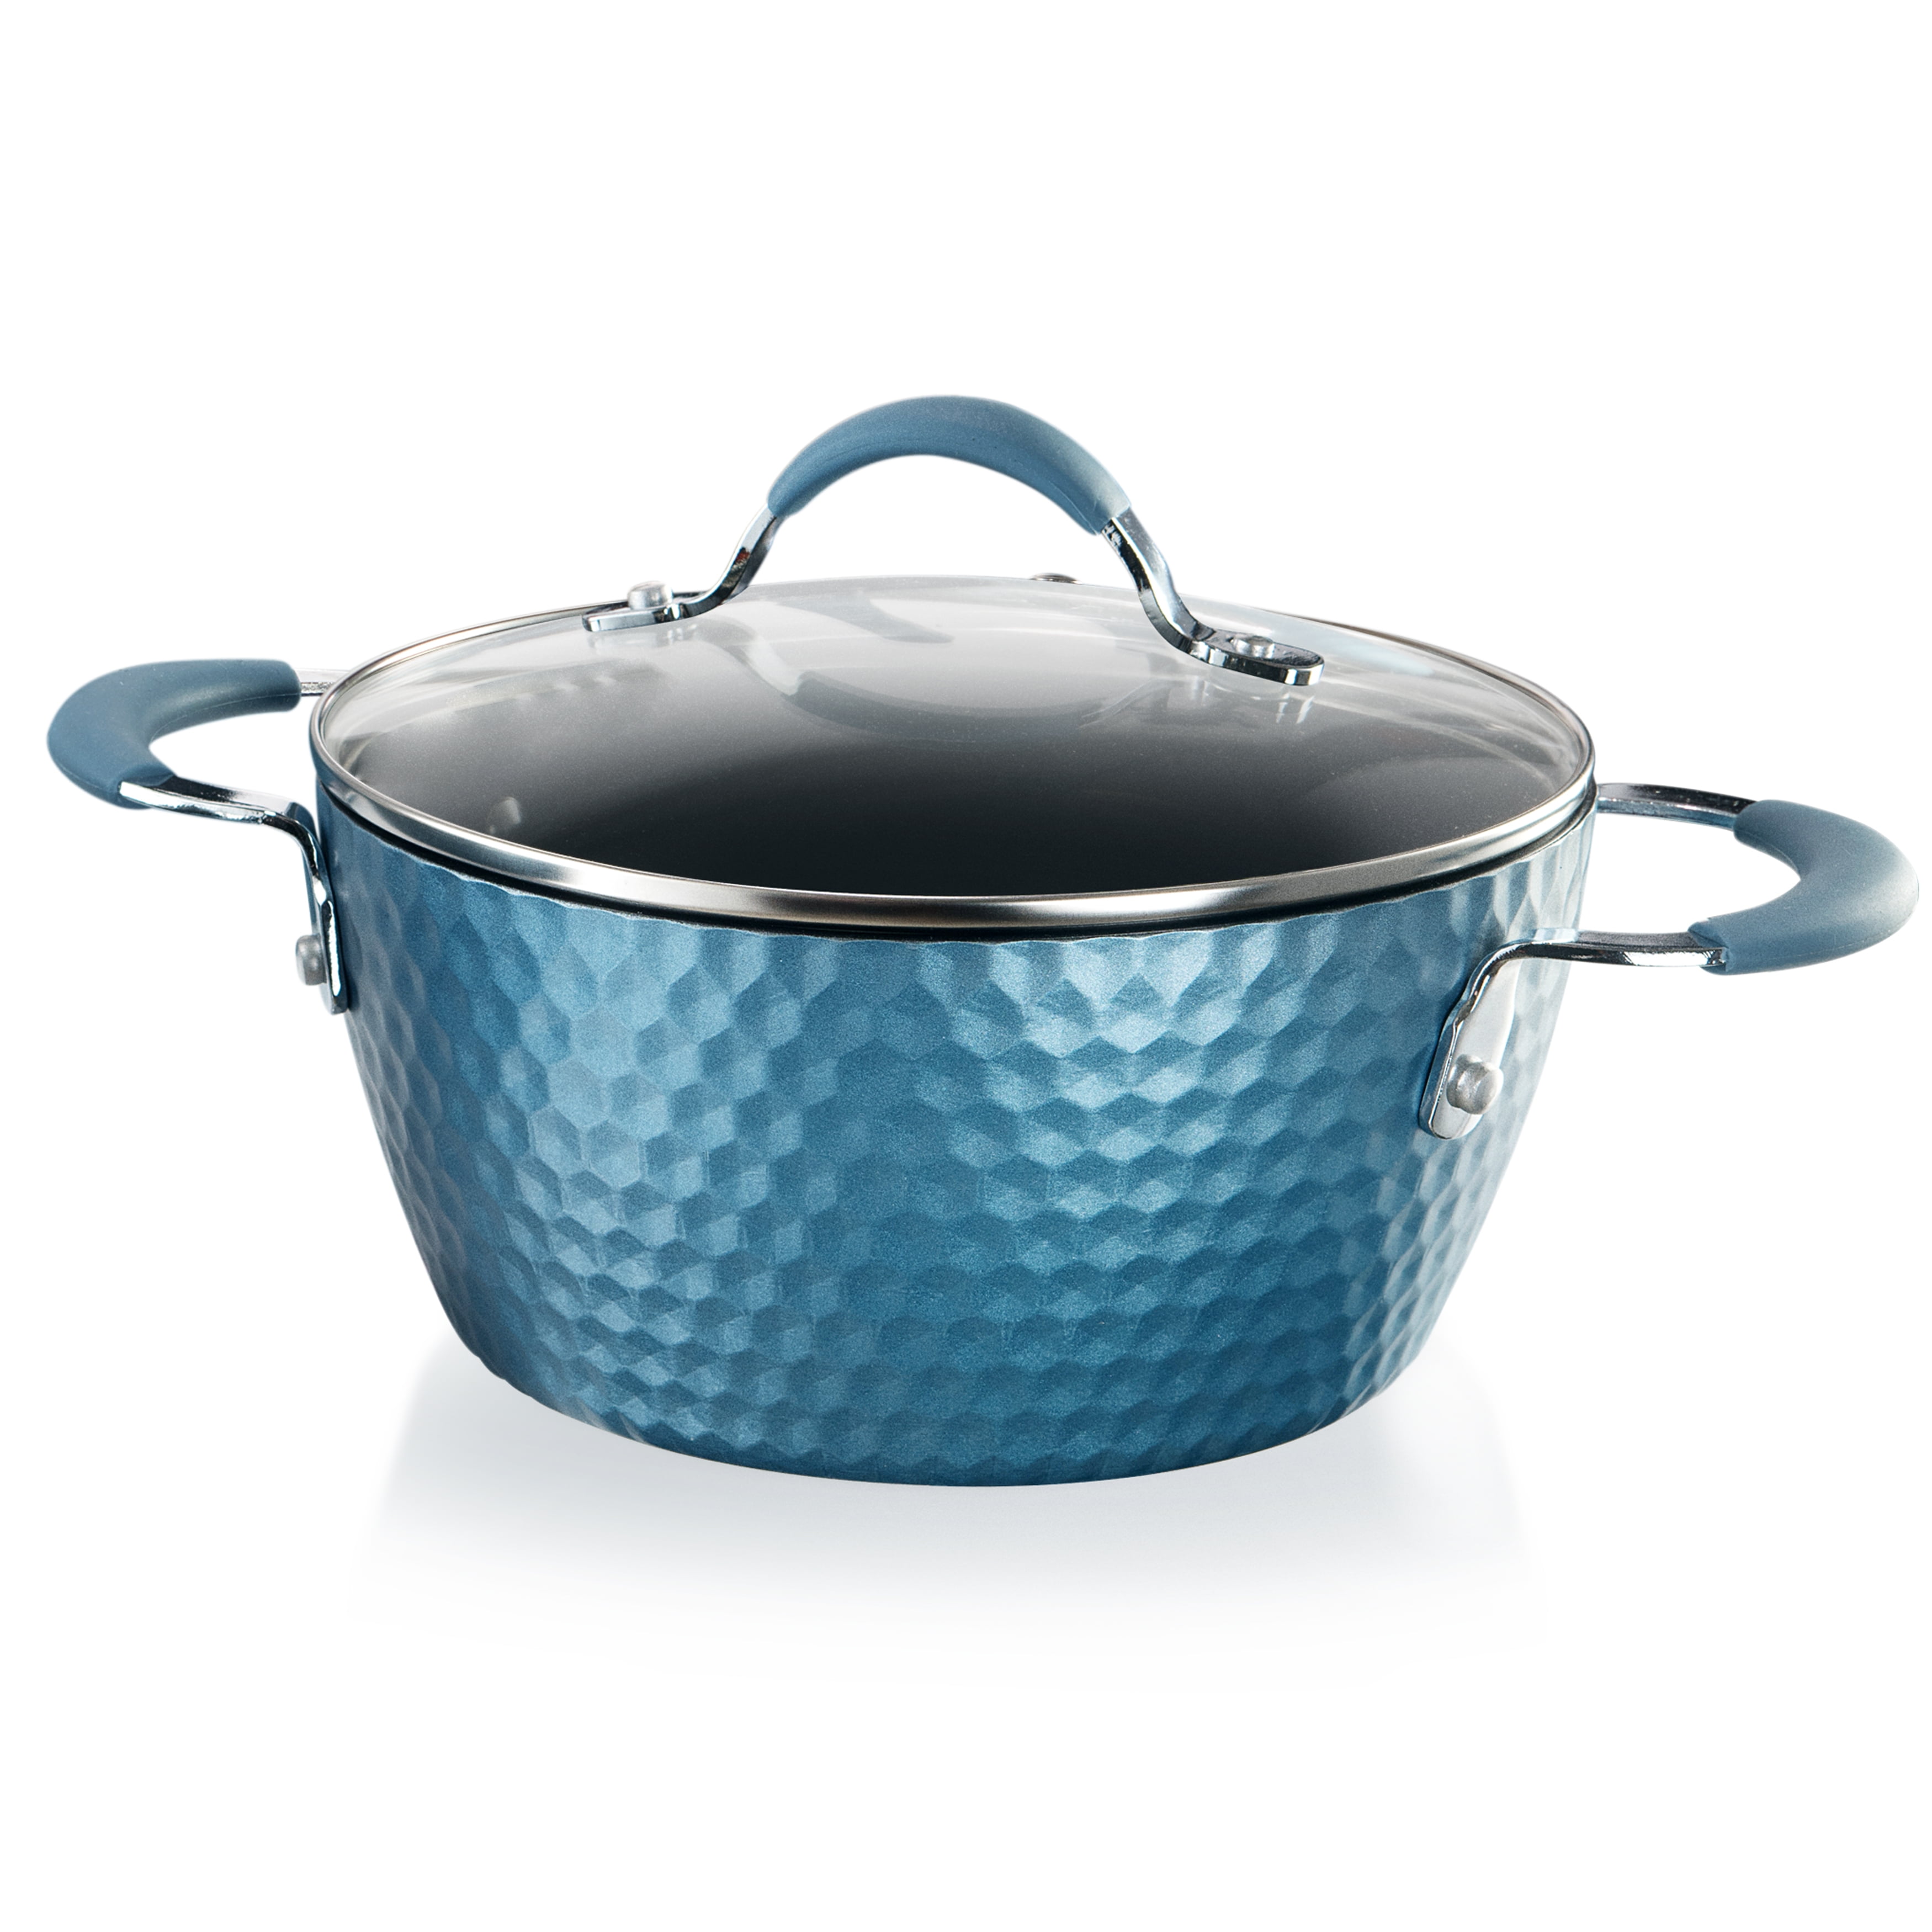 Milton Treat 2.5-Liter Insulated Hot Pot Keep Warm/Cold Thermo Casserole Small, 